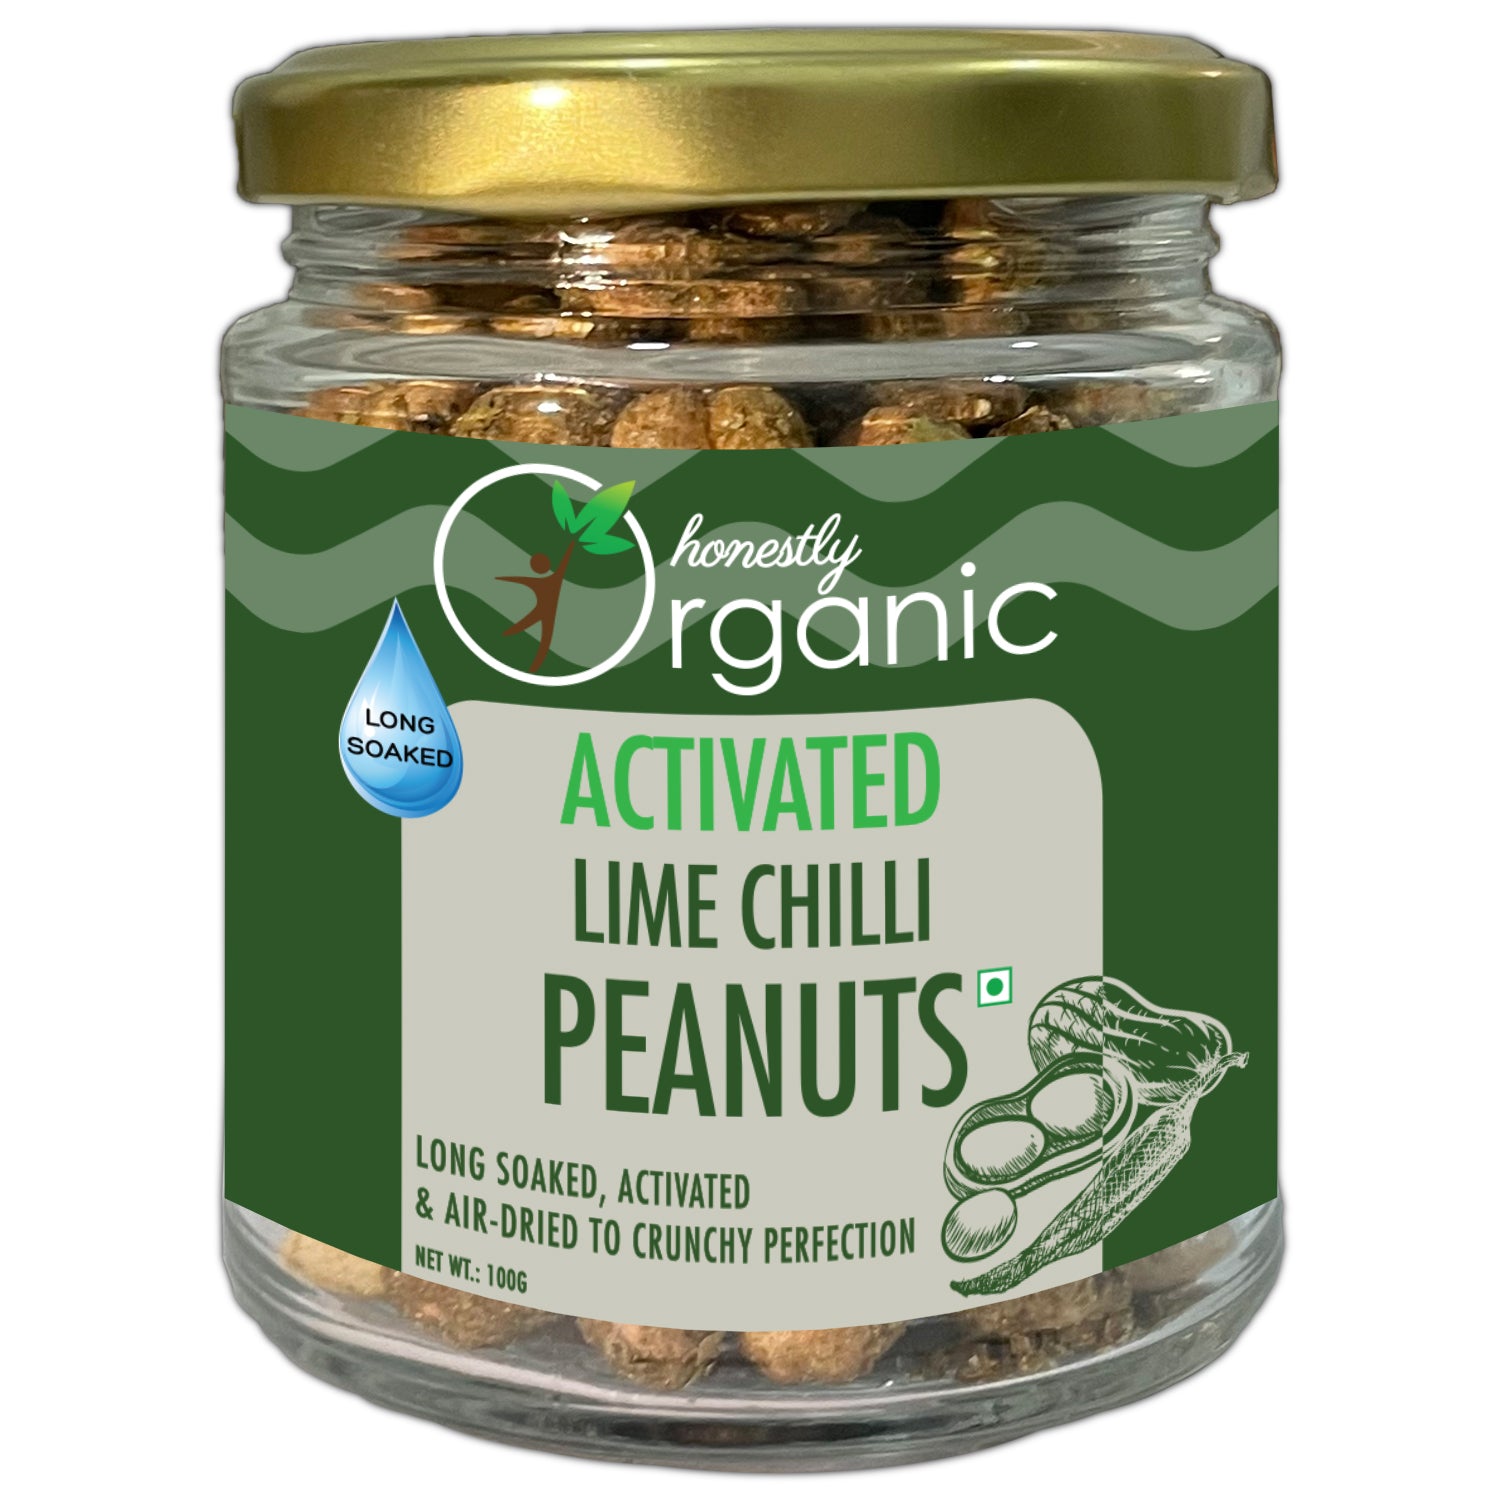 D-Alive Special Festival Hamper (Activated Peri Peri Cashews 100g + Activated Caramelised Coffee Walnuts 75g + Activated Cinnamon Chilli Almonds 100g + Activated Lime Chilli Peanuts 100g + Activated Pistachios 150g) - 525g